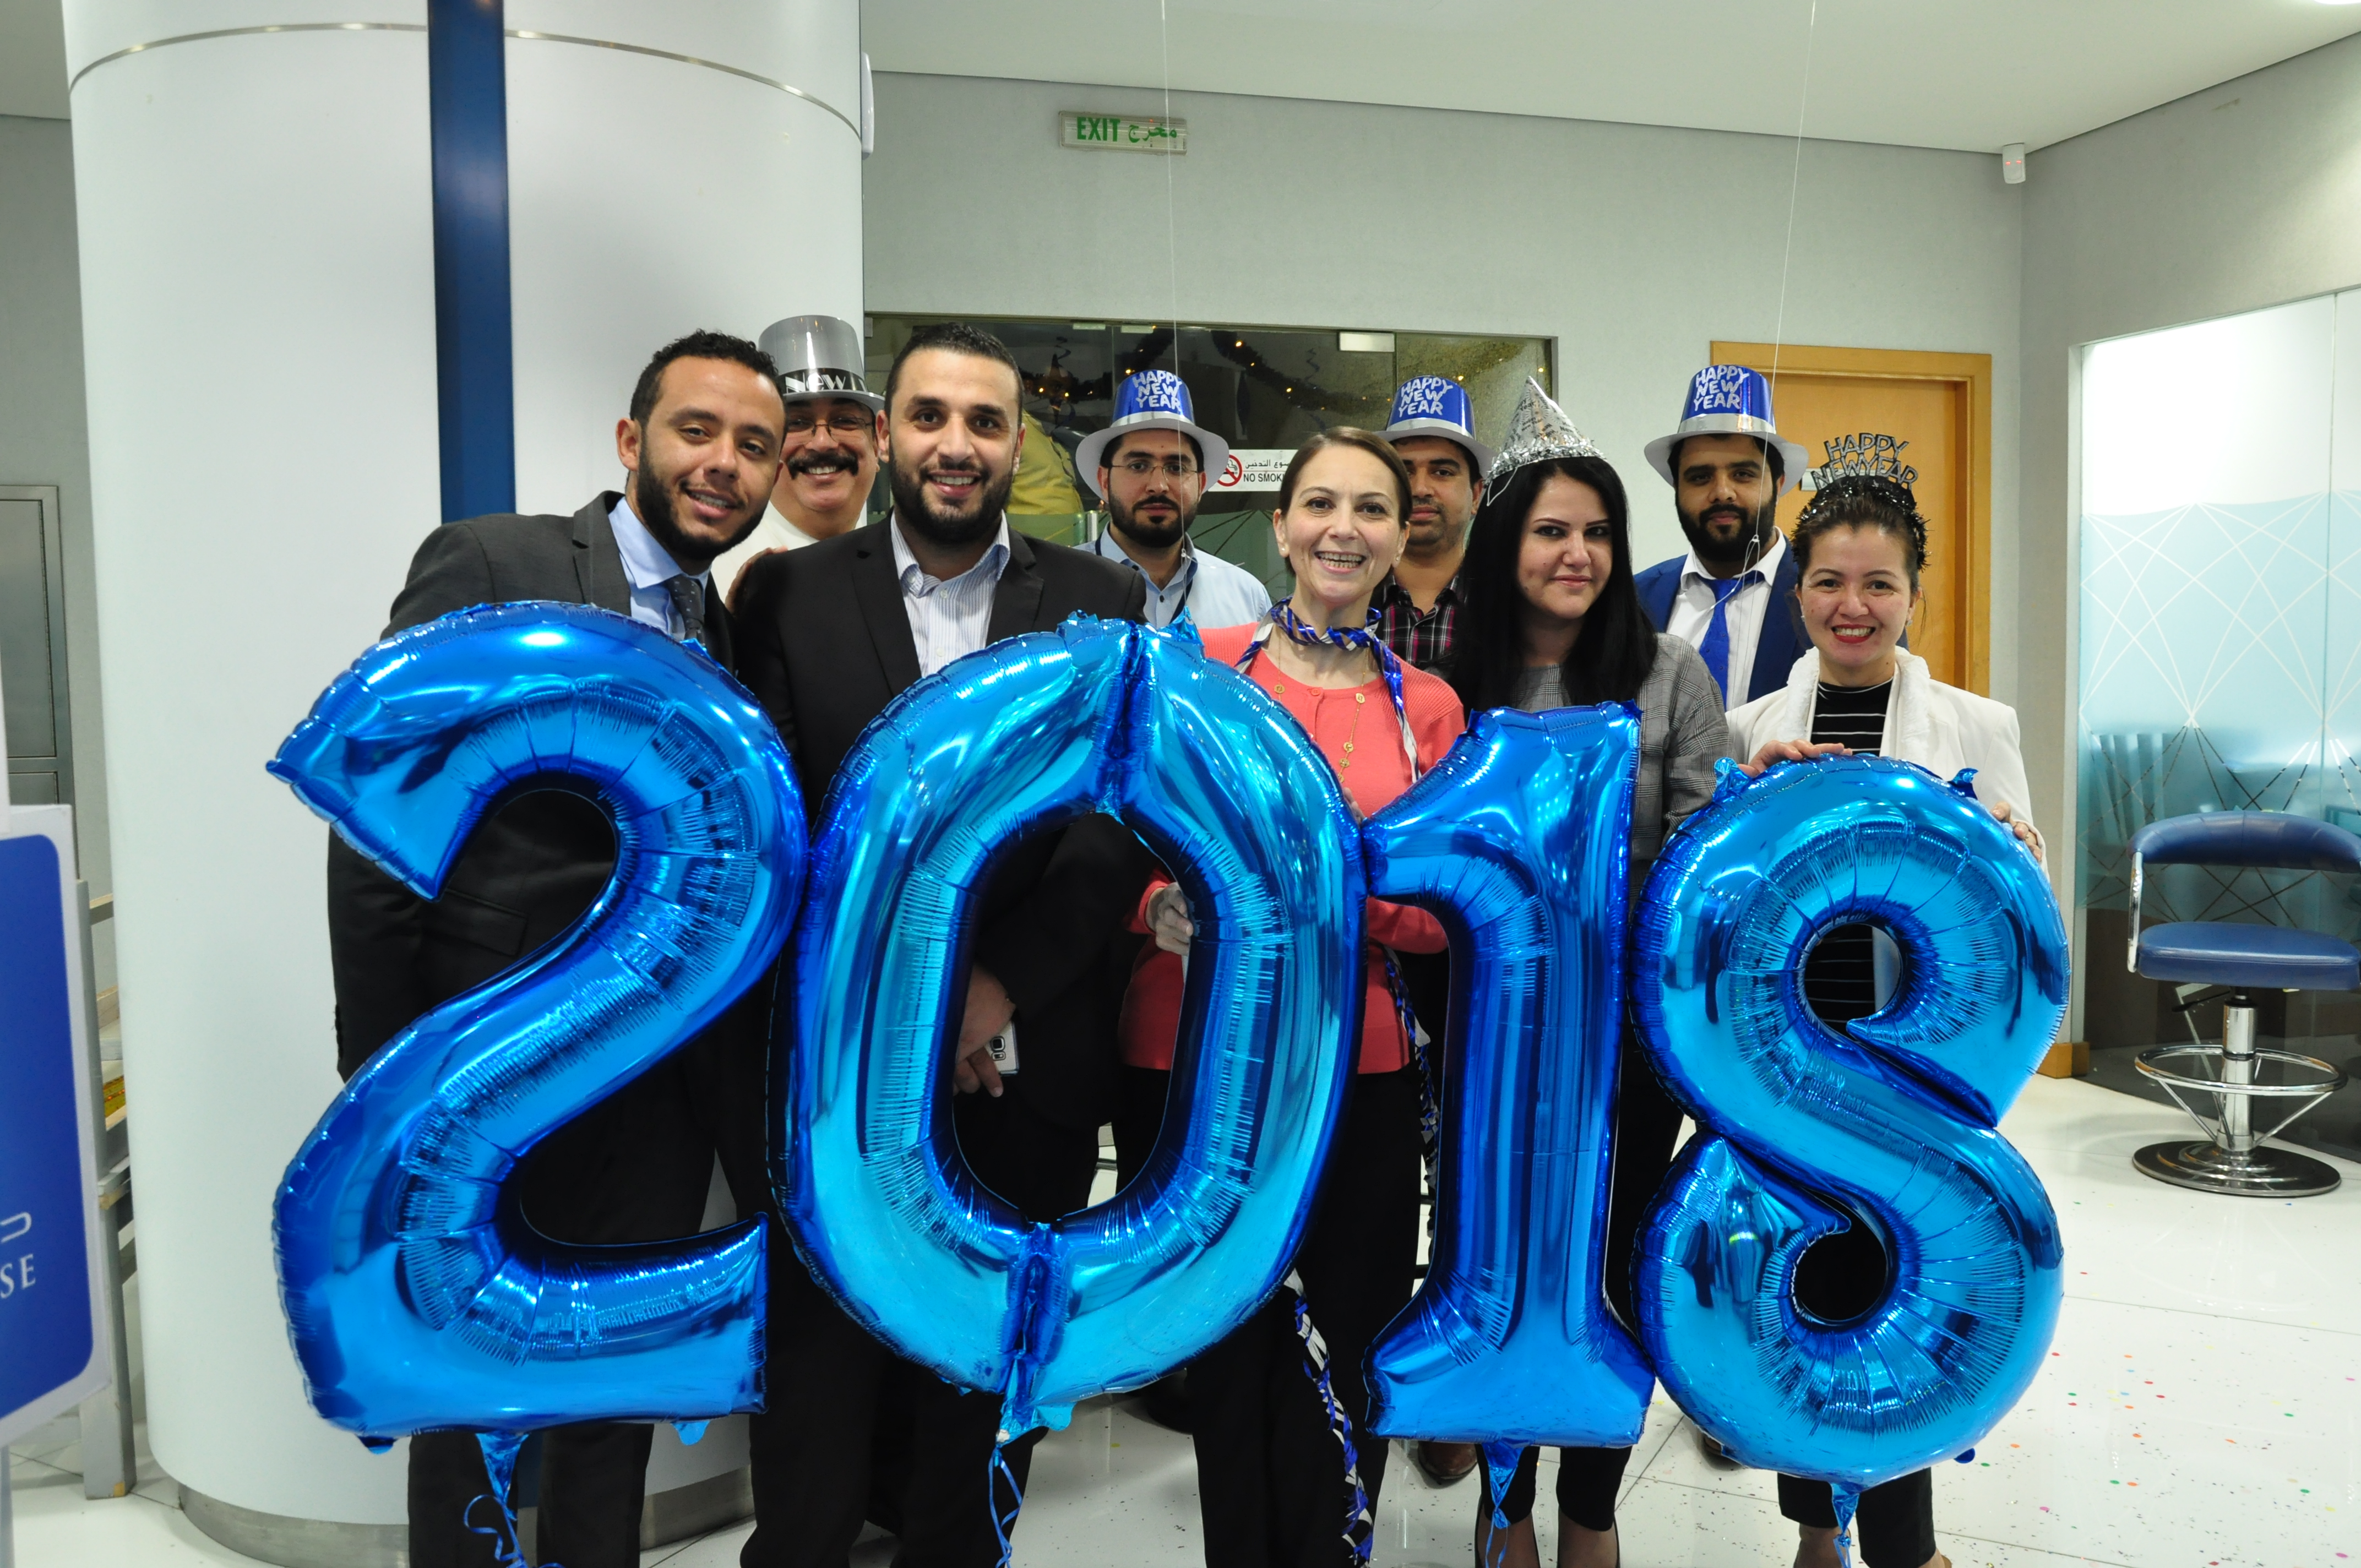 Finance House Welcomes The New Year_24